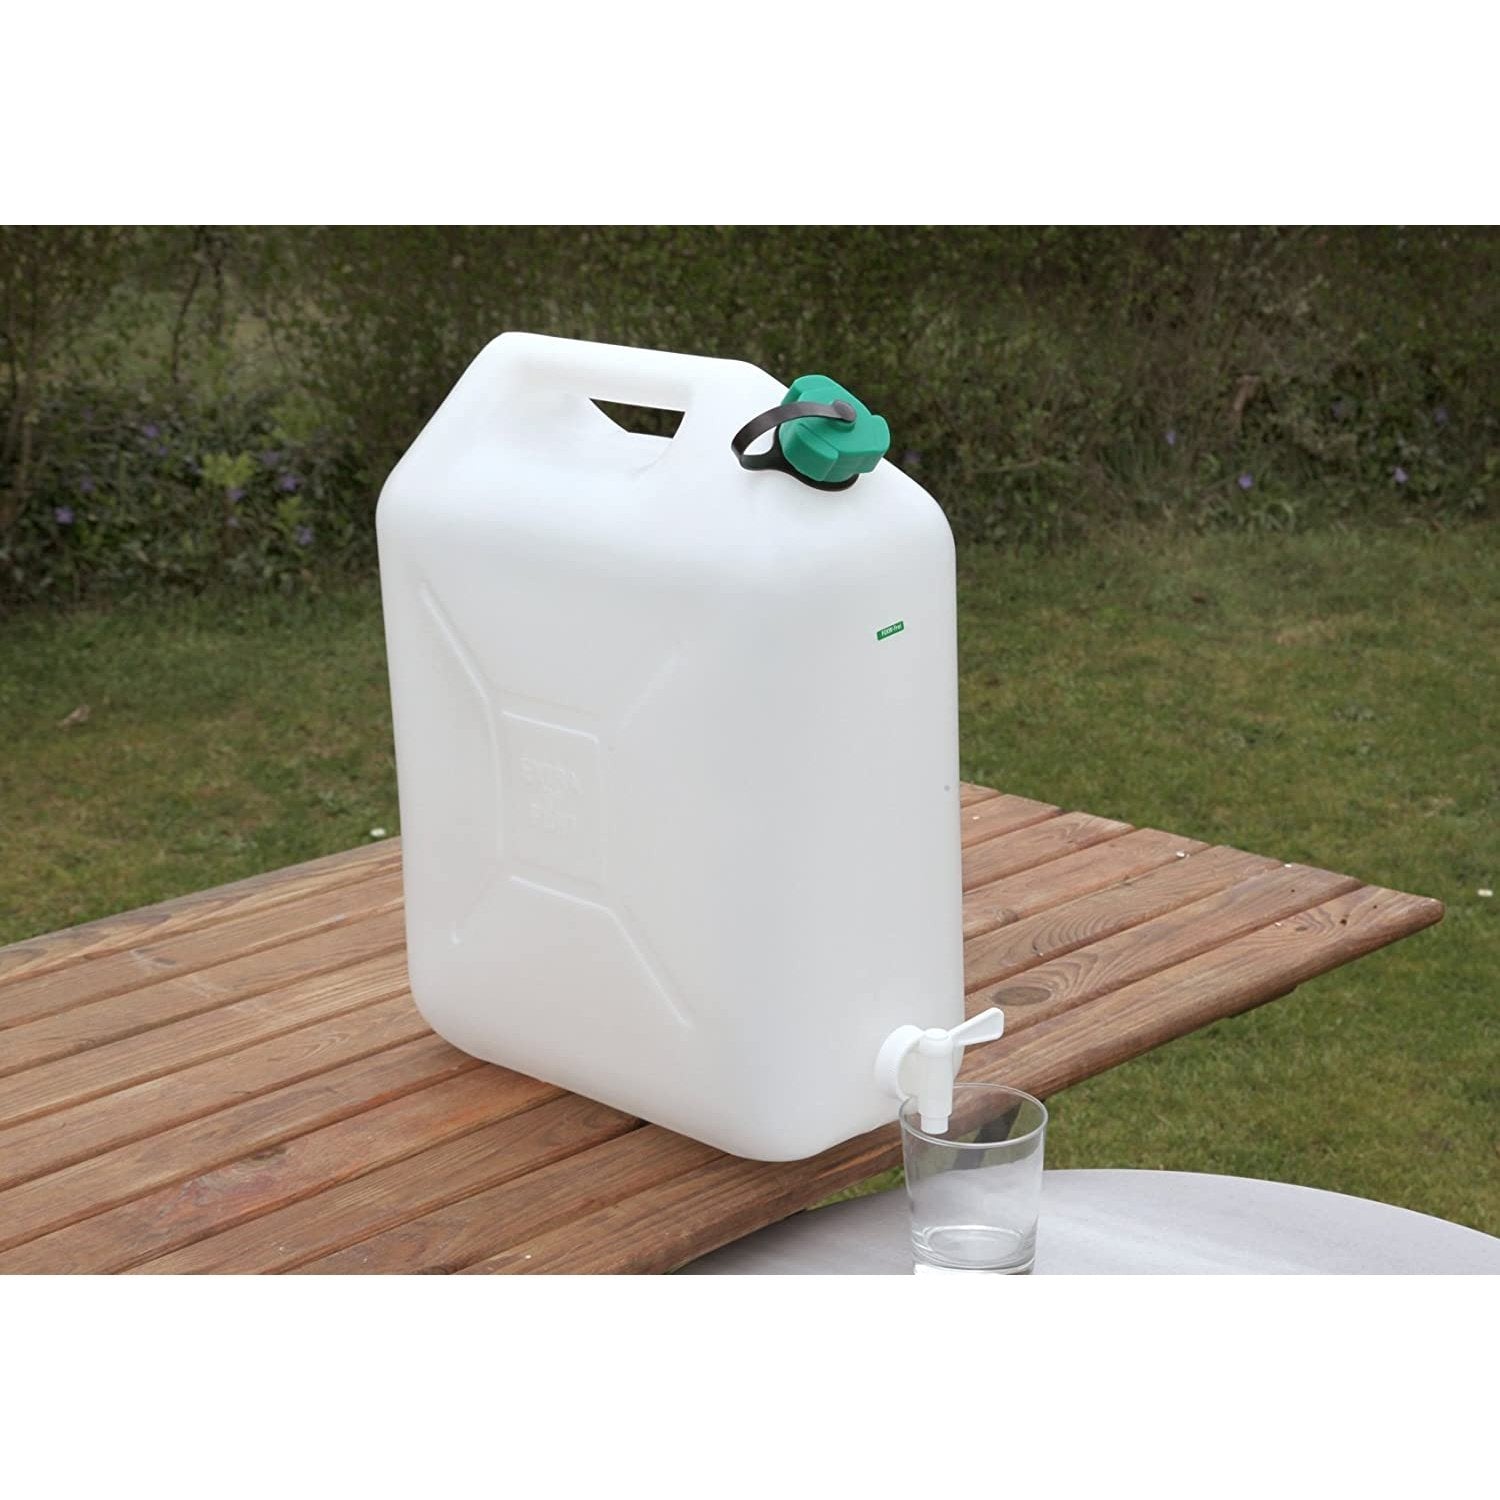 Buy High-Quality Jerrycan 20L with Tap for Water on Supply Master Ghana Gardening Tool Buy Tools hardware Building materials